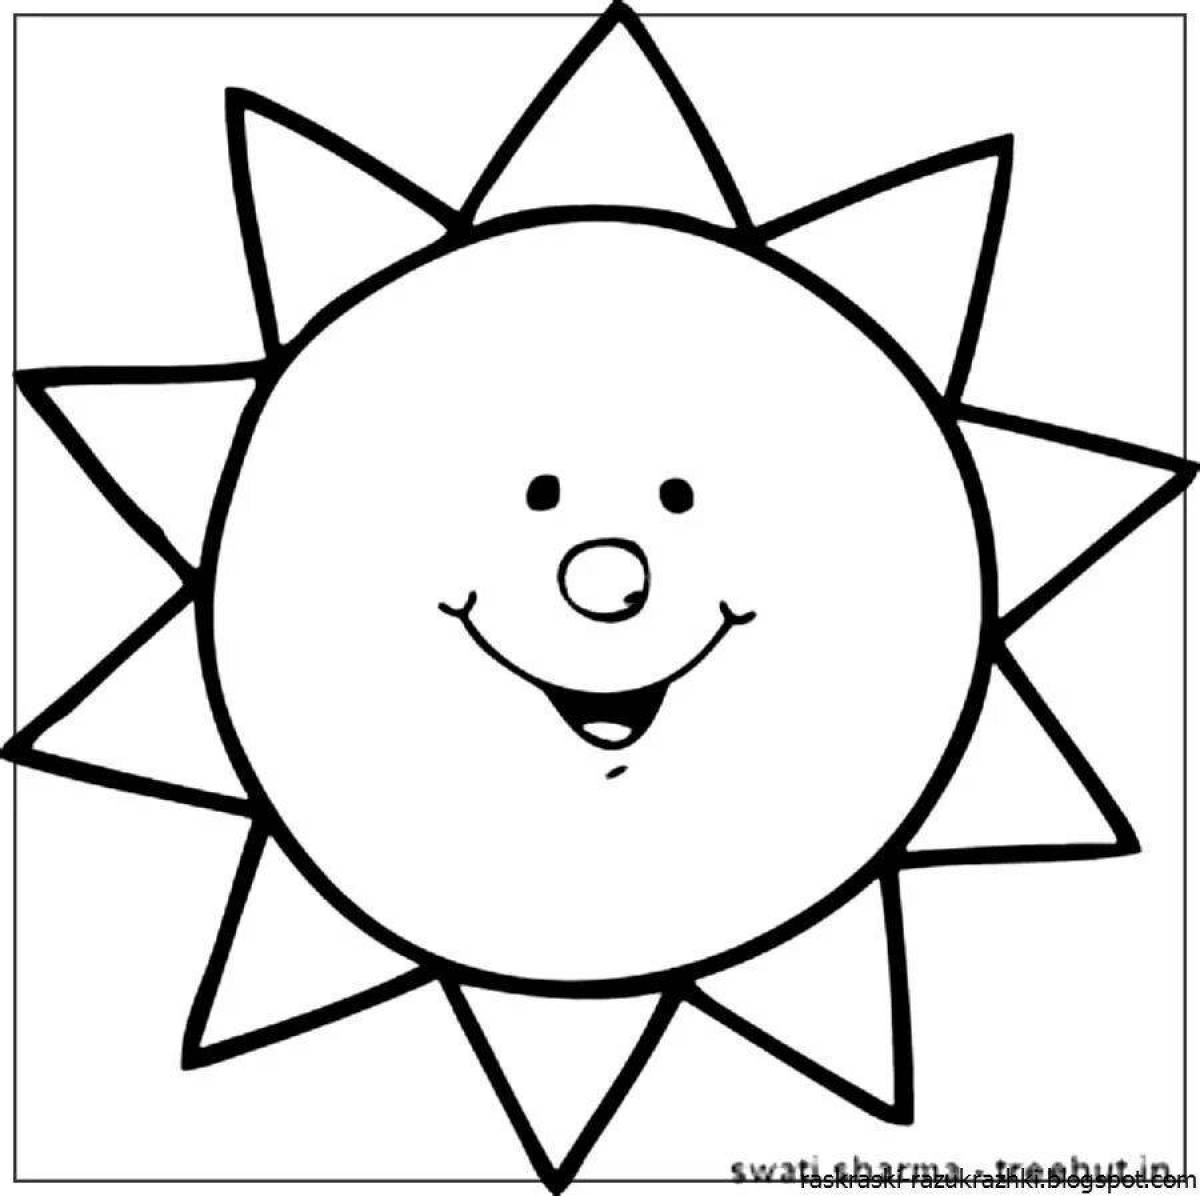 Cute sun coloring book for 2-3 year olds